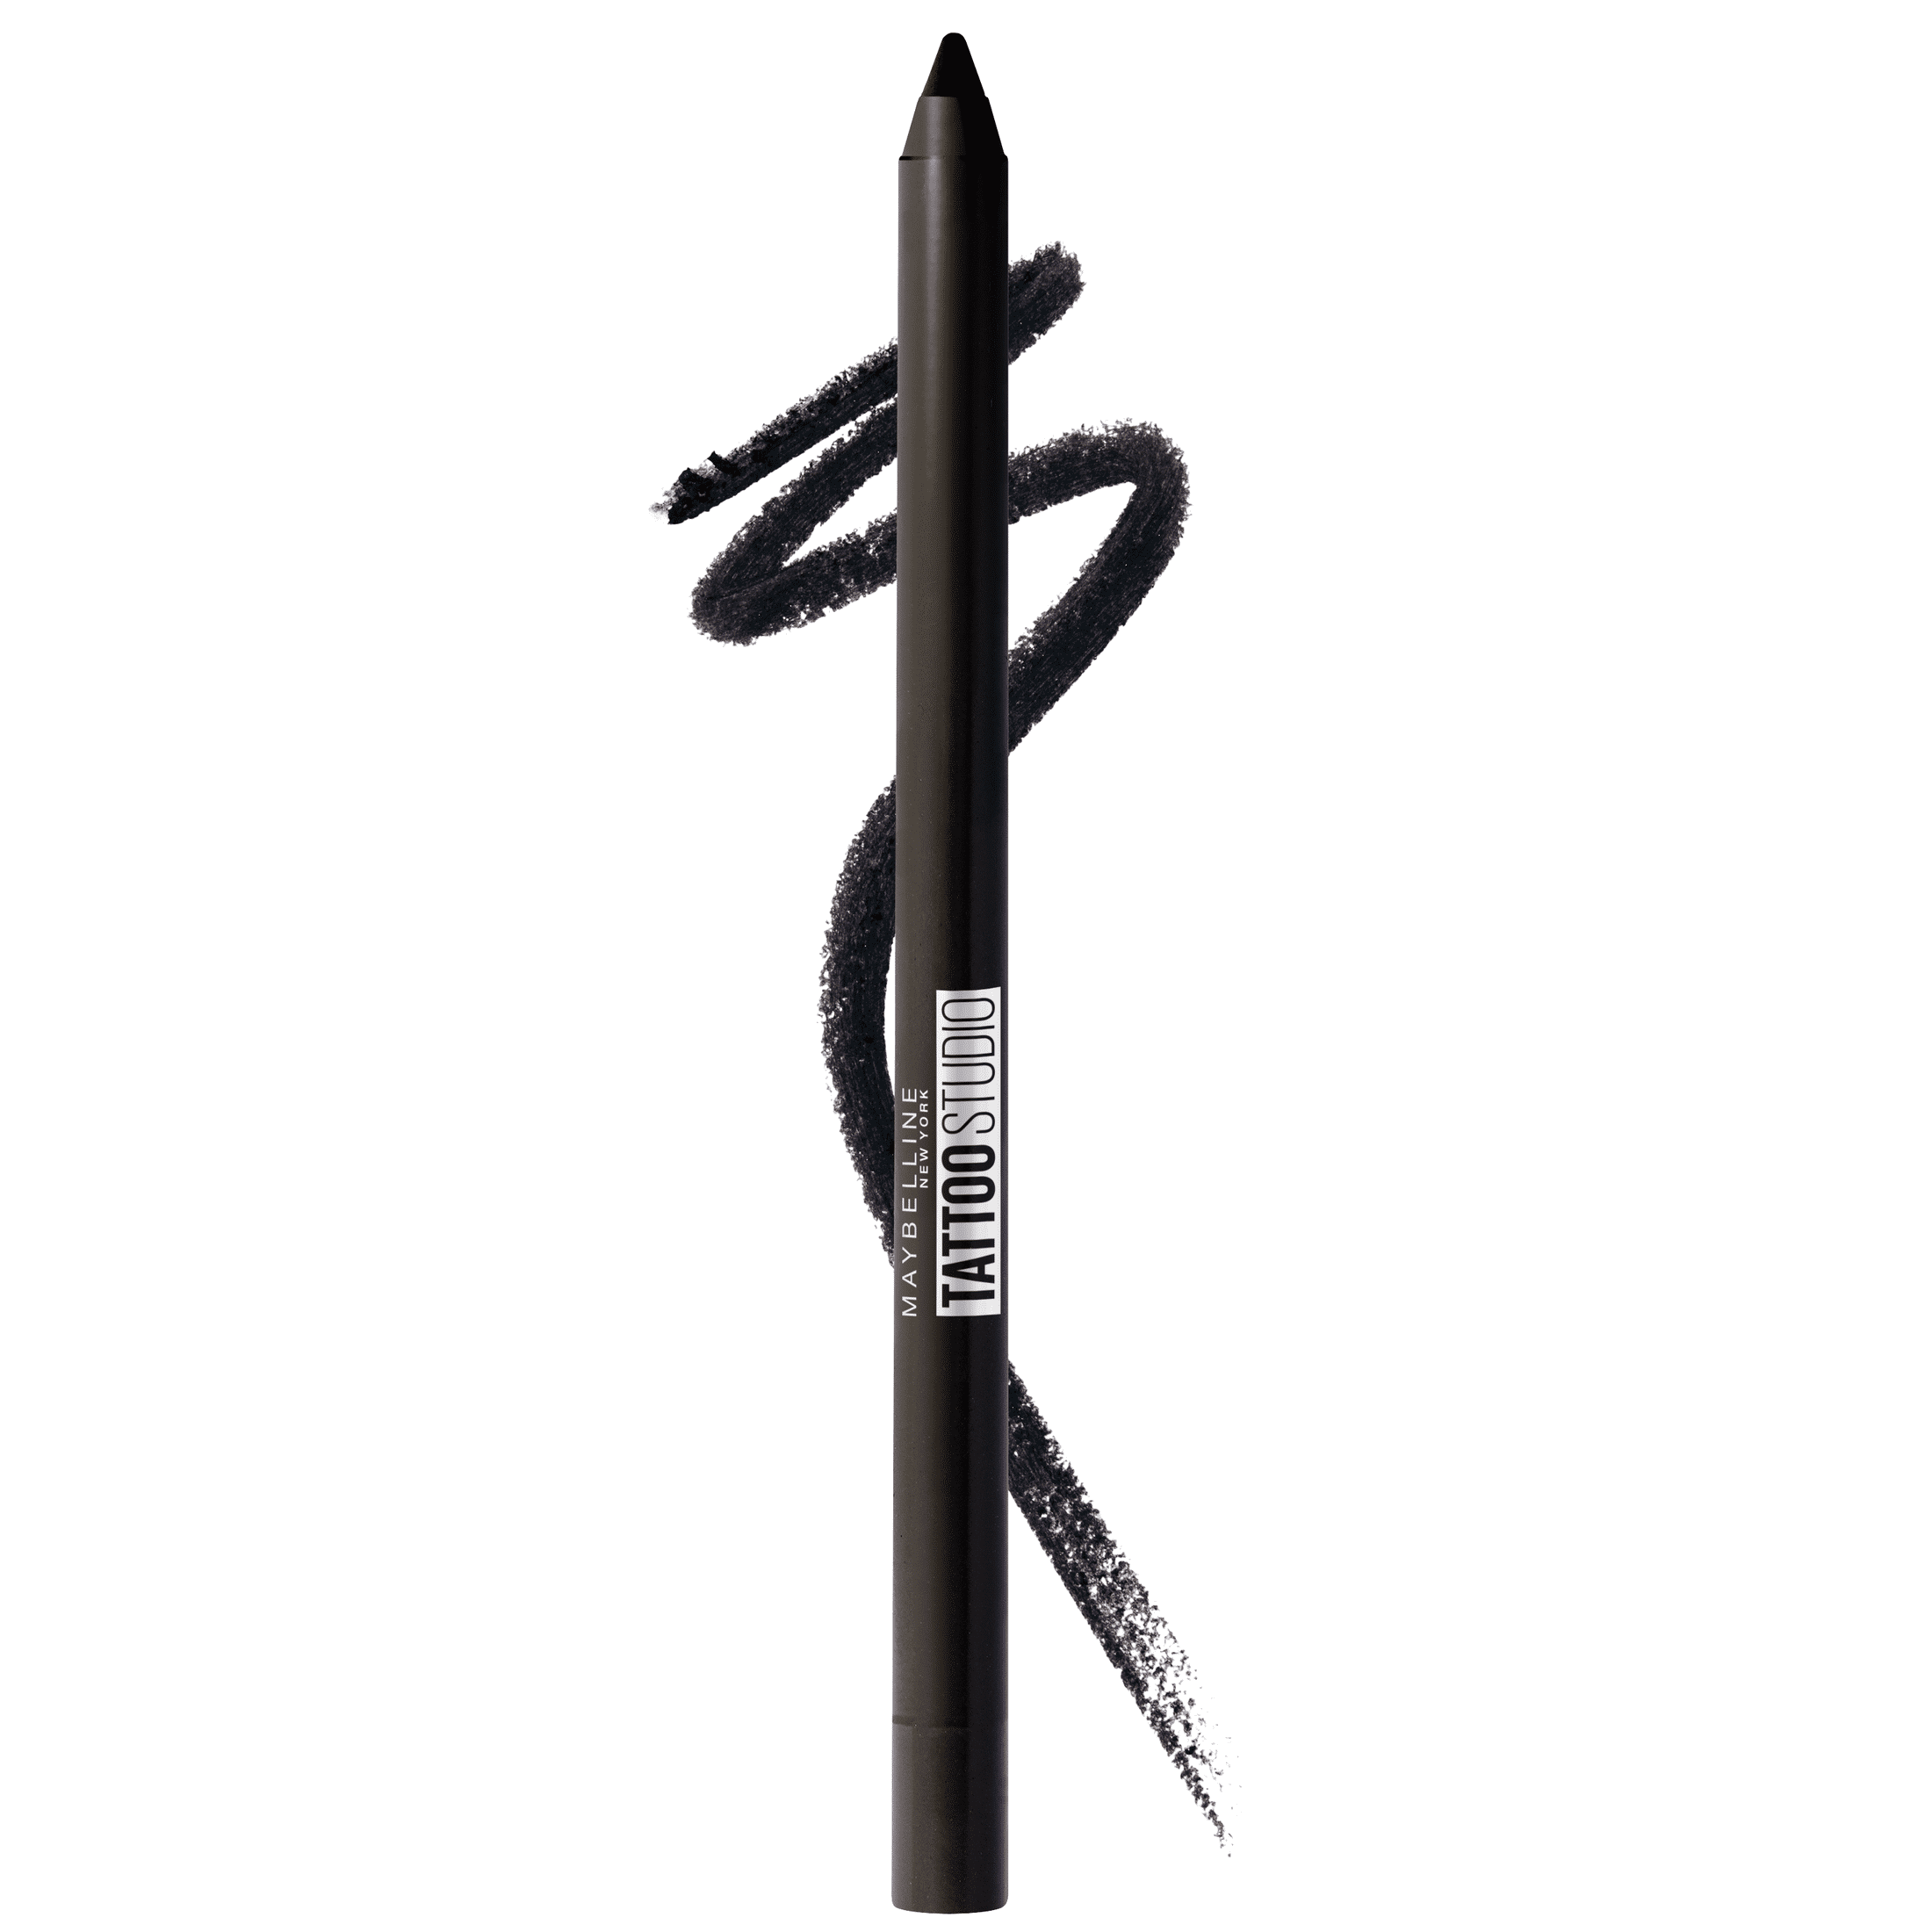 Maybelline Tattoo Liner Gel Pencil Review  Swatches in Onyx